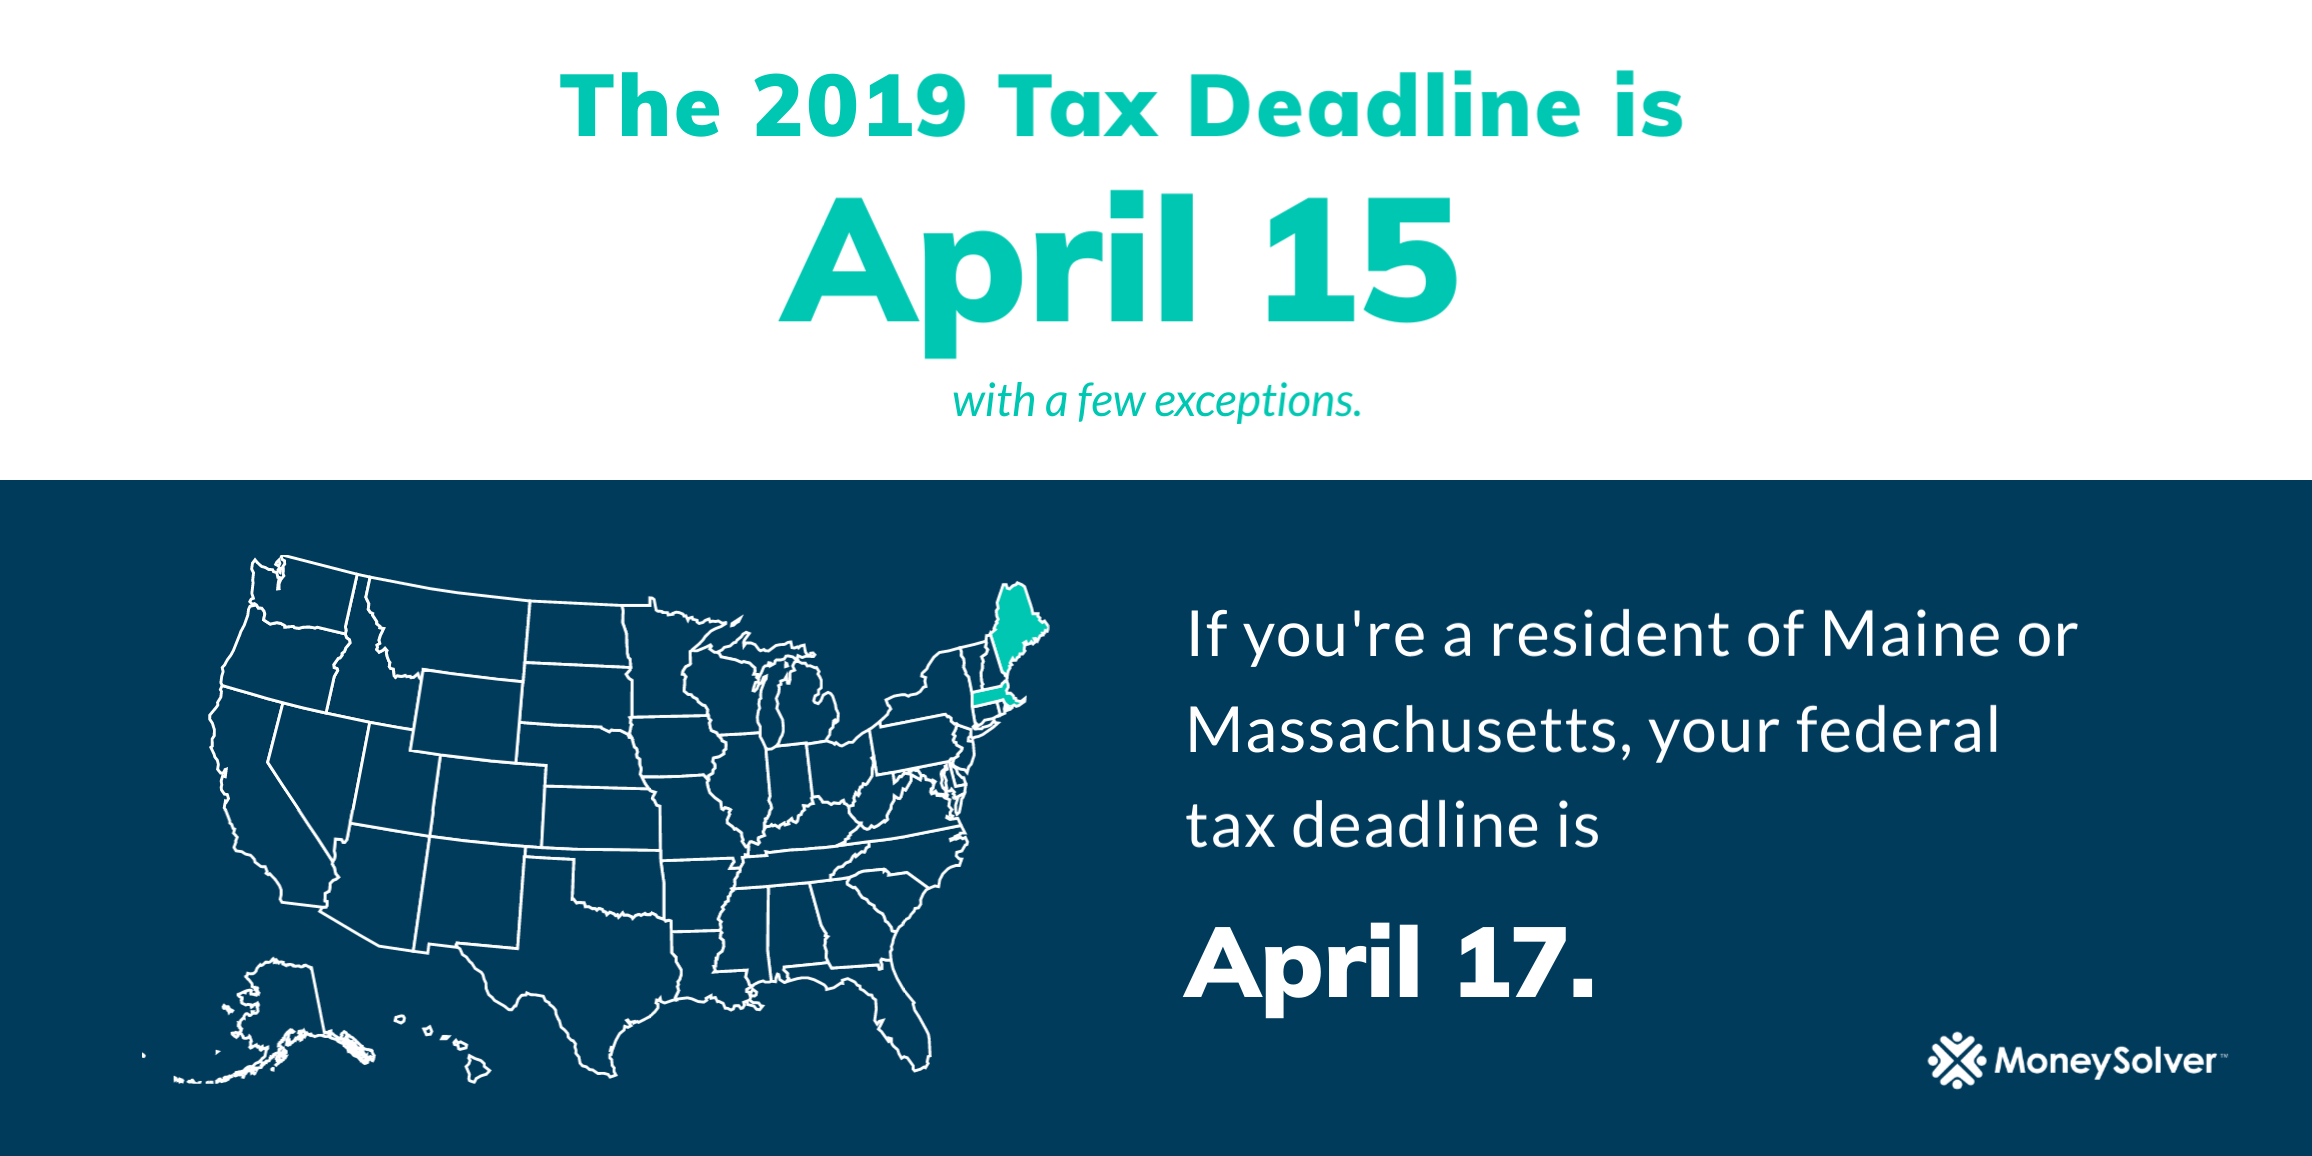 The 2019 Tax Deadline is April 15 for most taxpayers. Wondering, "How do I file a tax extension?" We can help.